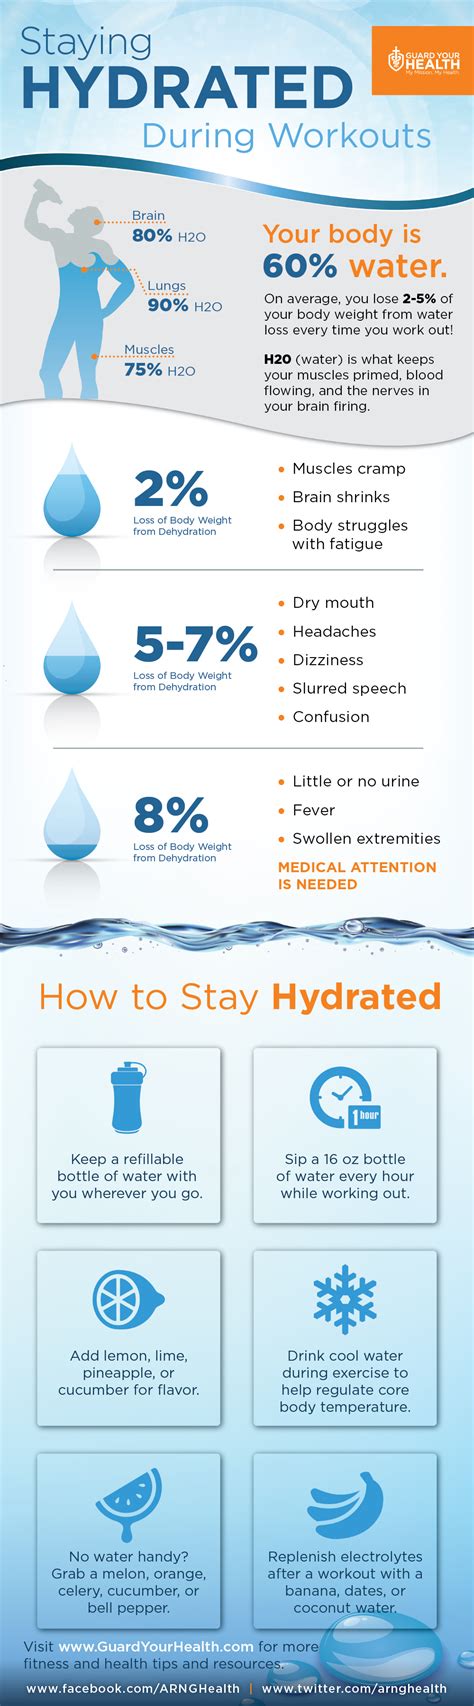 Staying Hydrated During Workouts Visually